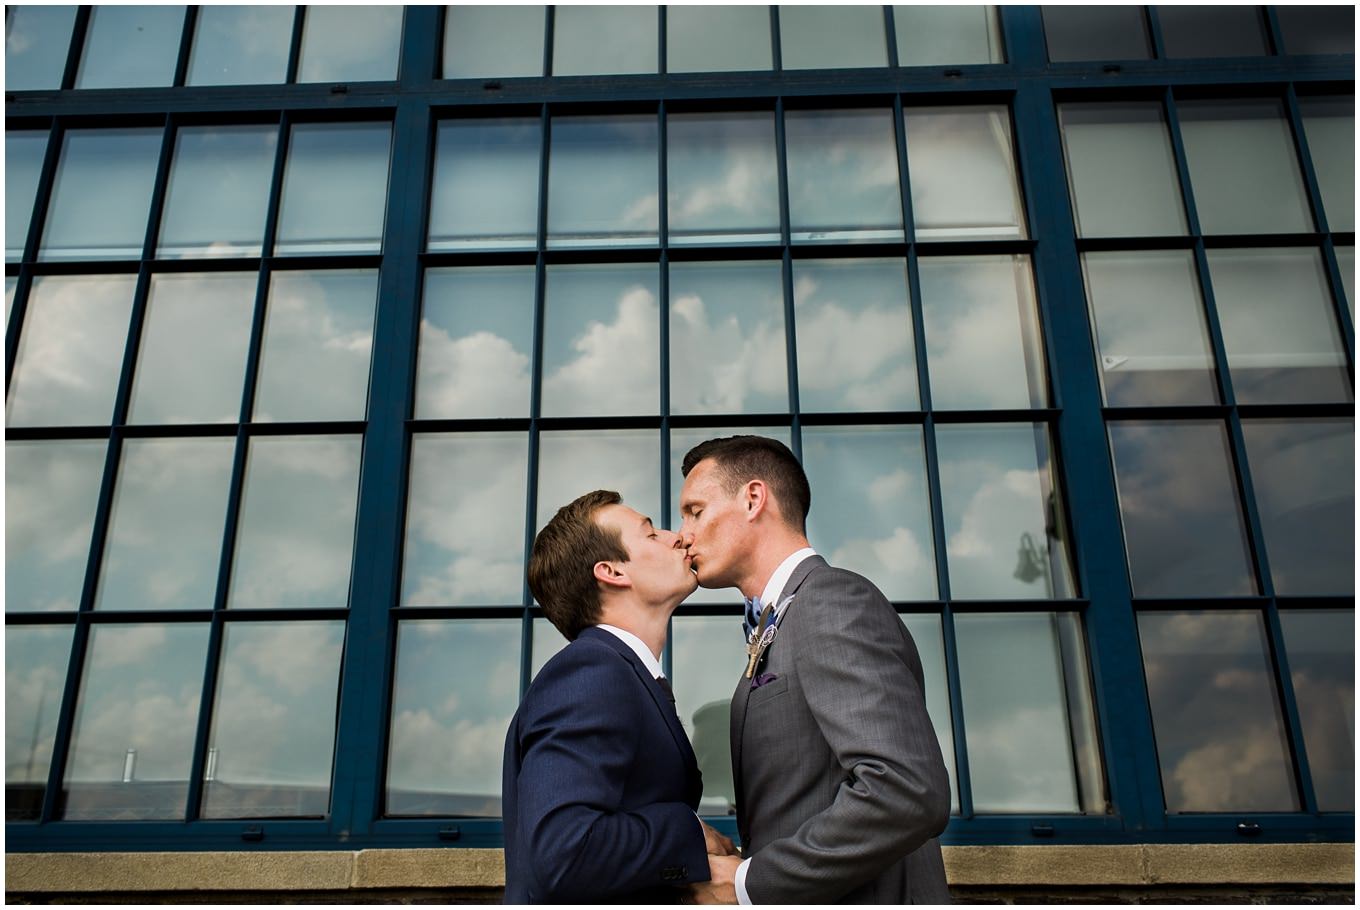 adam lowe photography, wedding, columbus, ohio, pride, gay, tom and terry, smith bros, dock 580, the loft, downtown, stylish, pursuit, ecoflora, groom and groom, grooms,